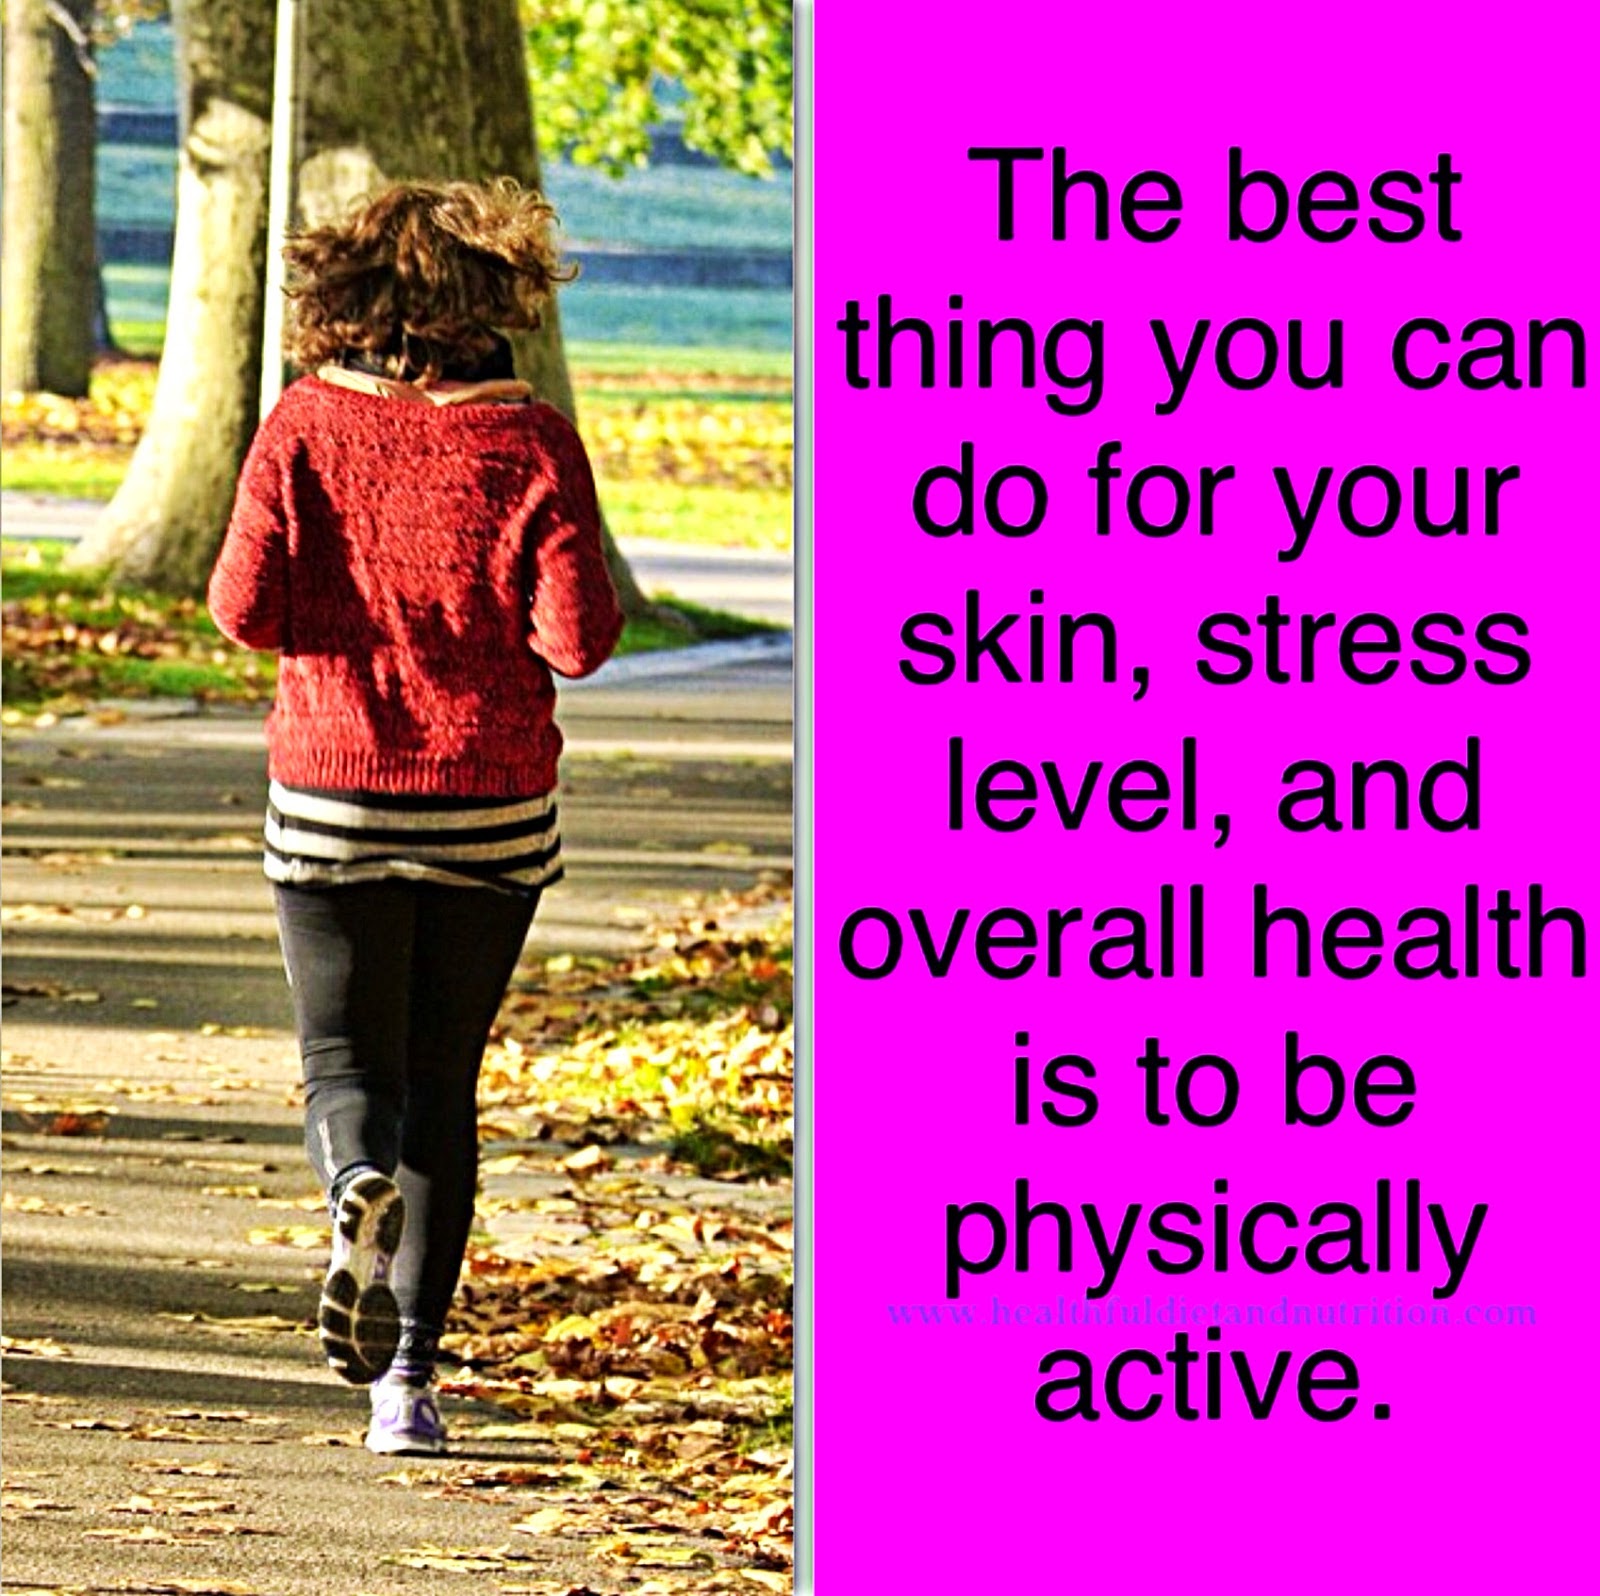 Stay Physically Active